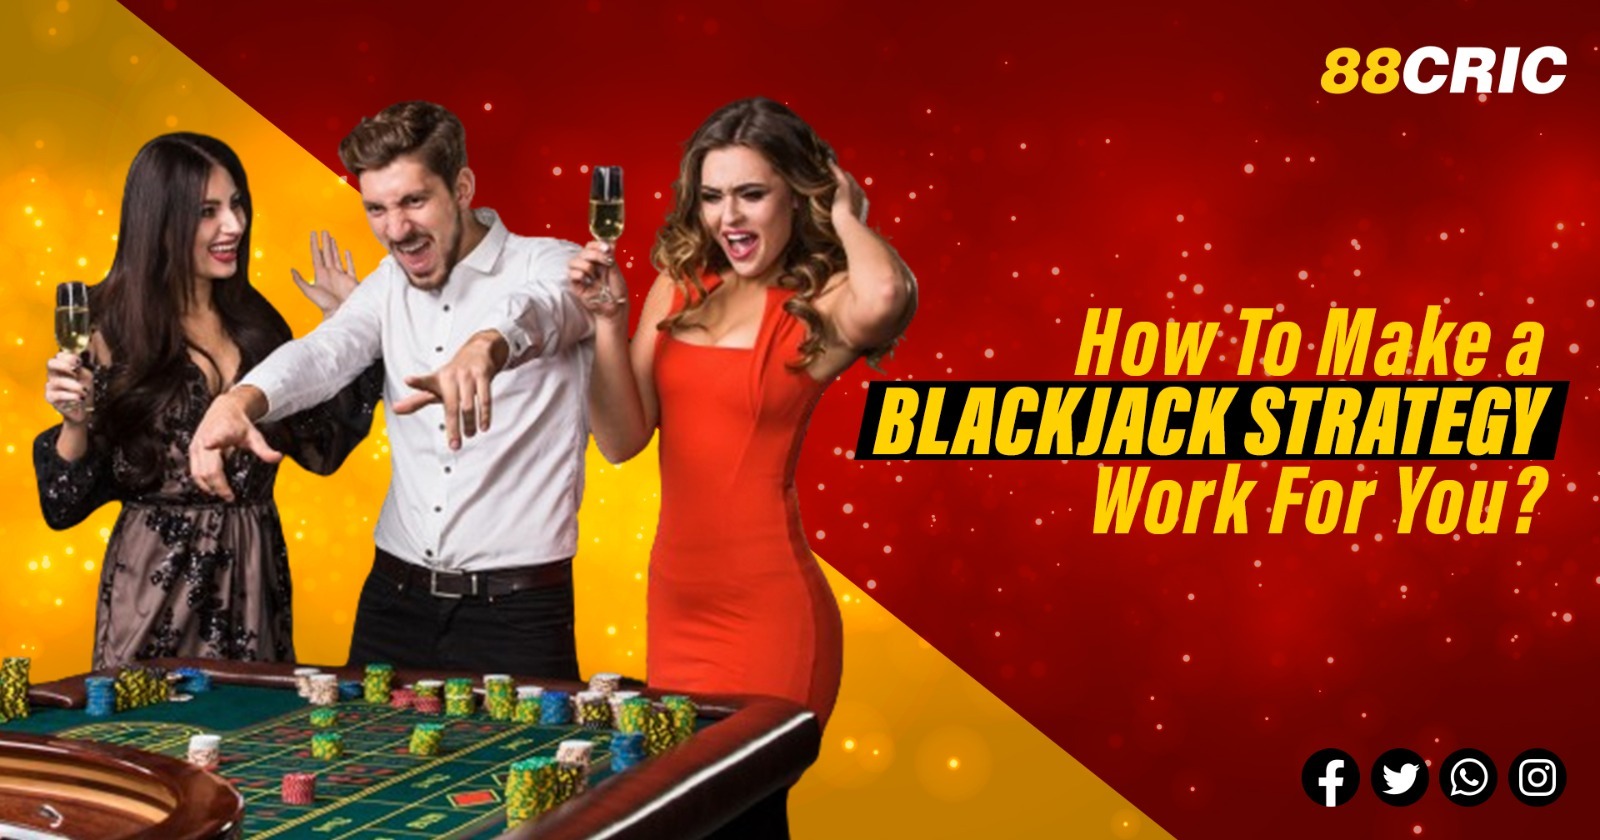 How To Make a Blackjack Strategy Work For You? -